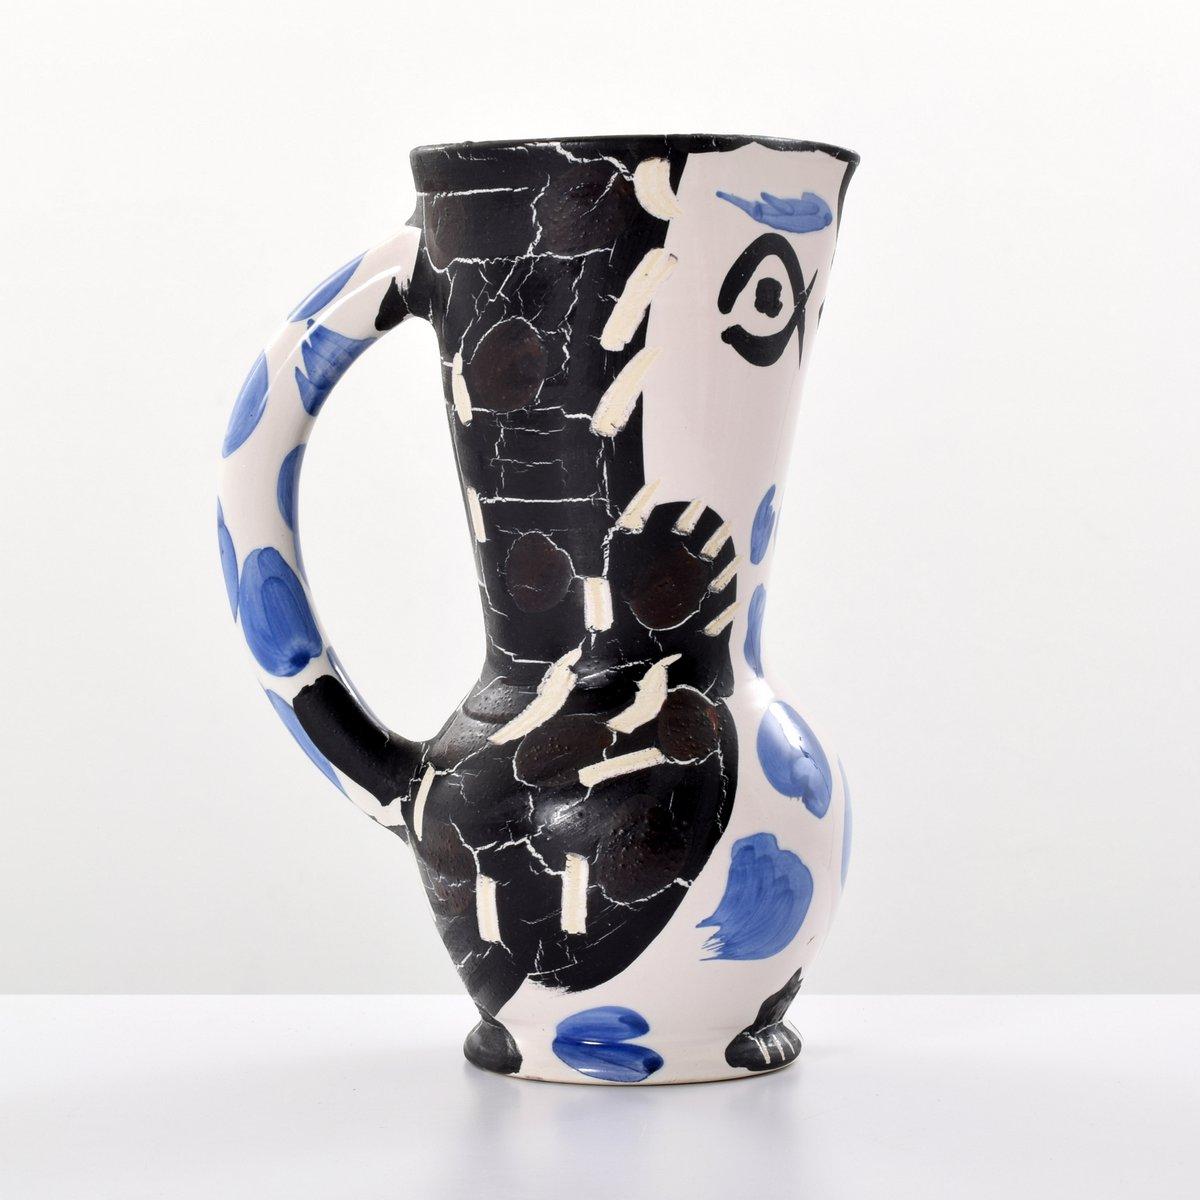 Cruchon Hibou pitcher by Pablo Picasso (Spanish, 1881-1973). Provenance: Estate of Samuel L. Scher, M.D, Florida. Reference: Pablo Picasso- Catalogue of the Edited Ceramic Works 1947-1971, Alain Ramie, 293.

Markings: Madoura Plein Feu imprint,